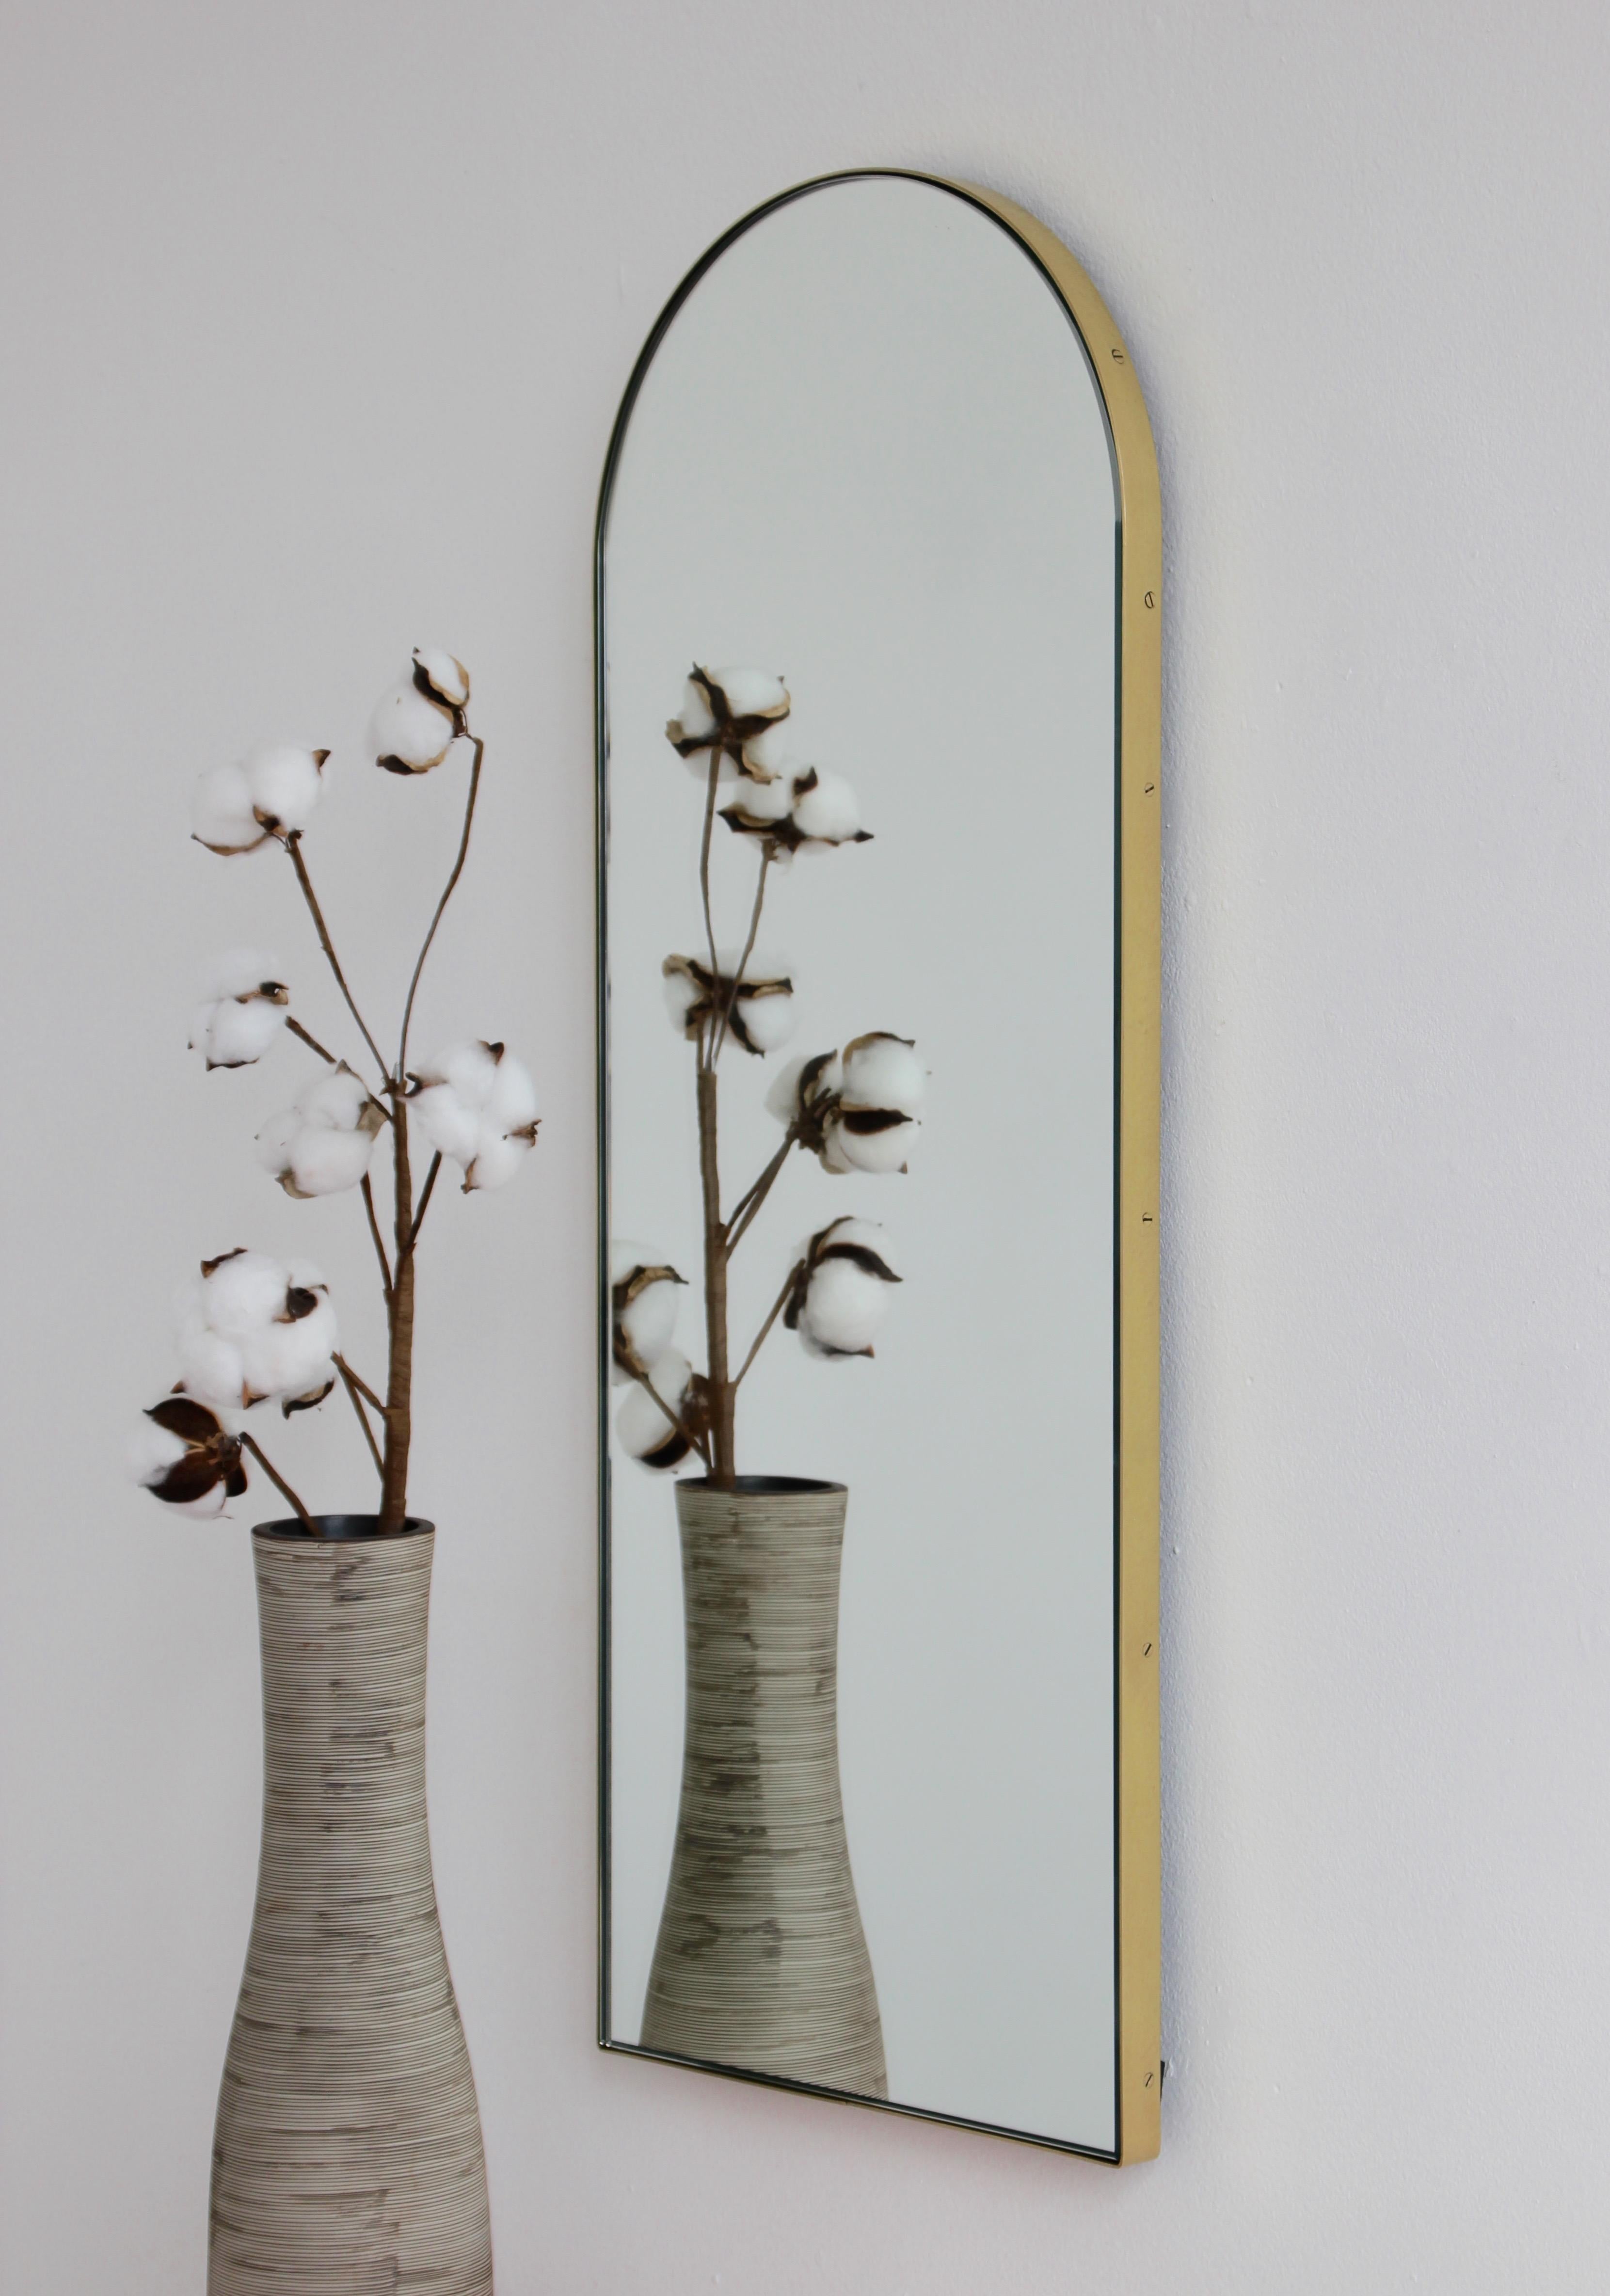 Delightful arch shaped narrow mirror with an elegant solid brushed brass frame. Designed and handcrafted in London, UK.

Fitted with a brass hook or an aluminium z-bar depending on the size of the mirror. Also available on demand with a split batten